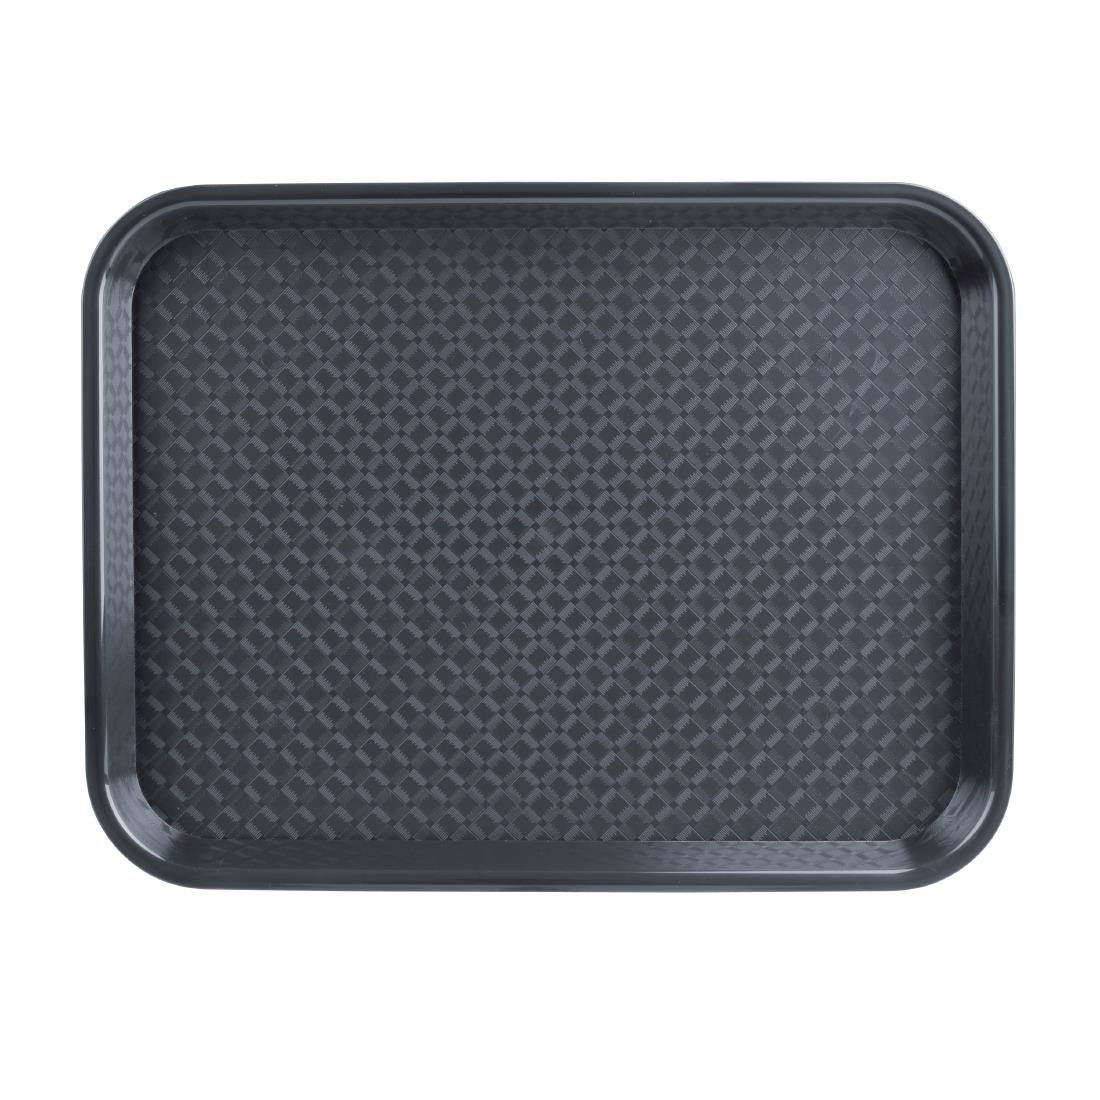 FD936 Kristallon Foodservice Tray Charcoal 265 x 345mm JD Catering Equipment Solutions Ltd